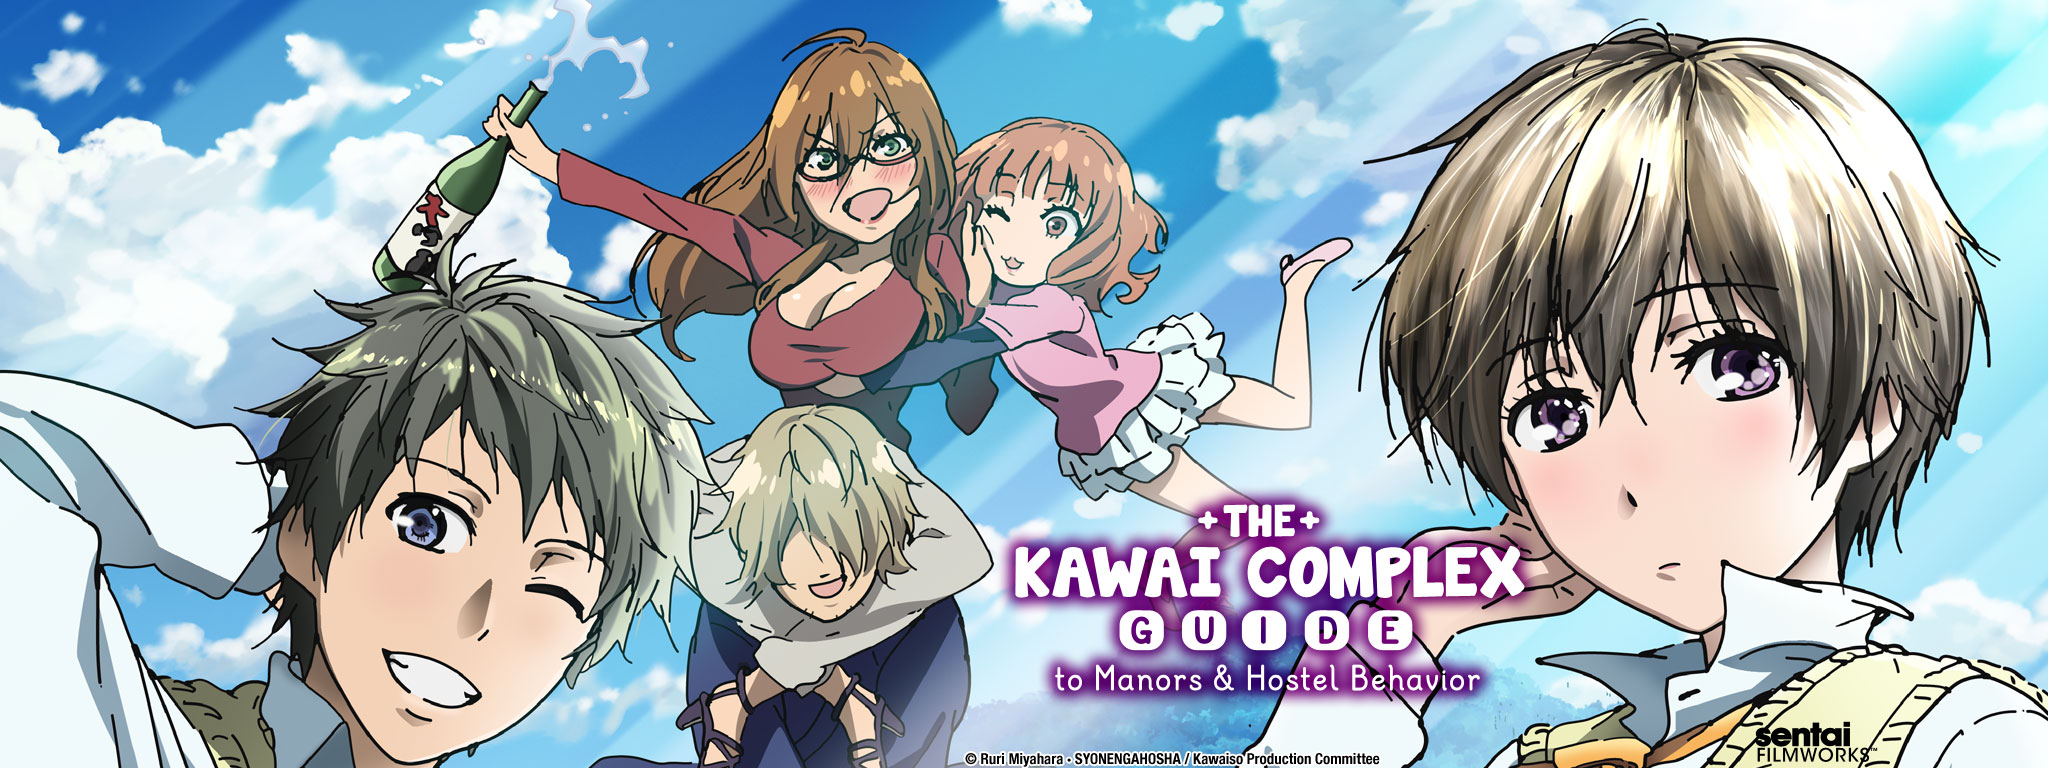 Title Art for The Kawai Complex Guide to Manors and Hostel Behavior